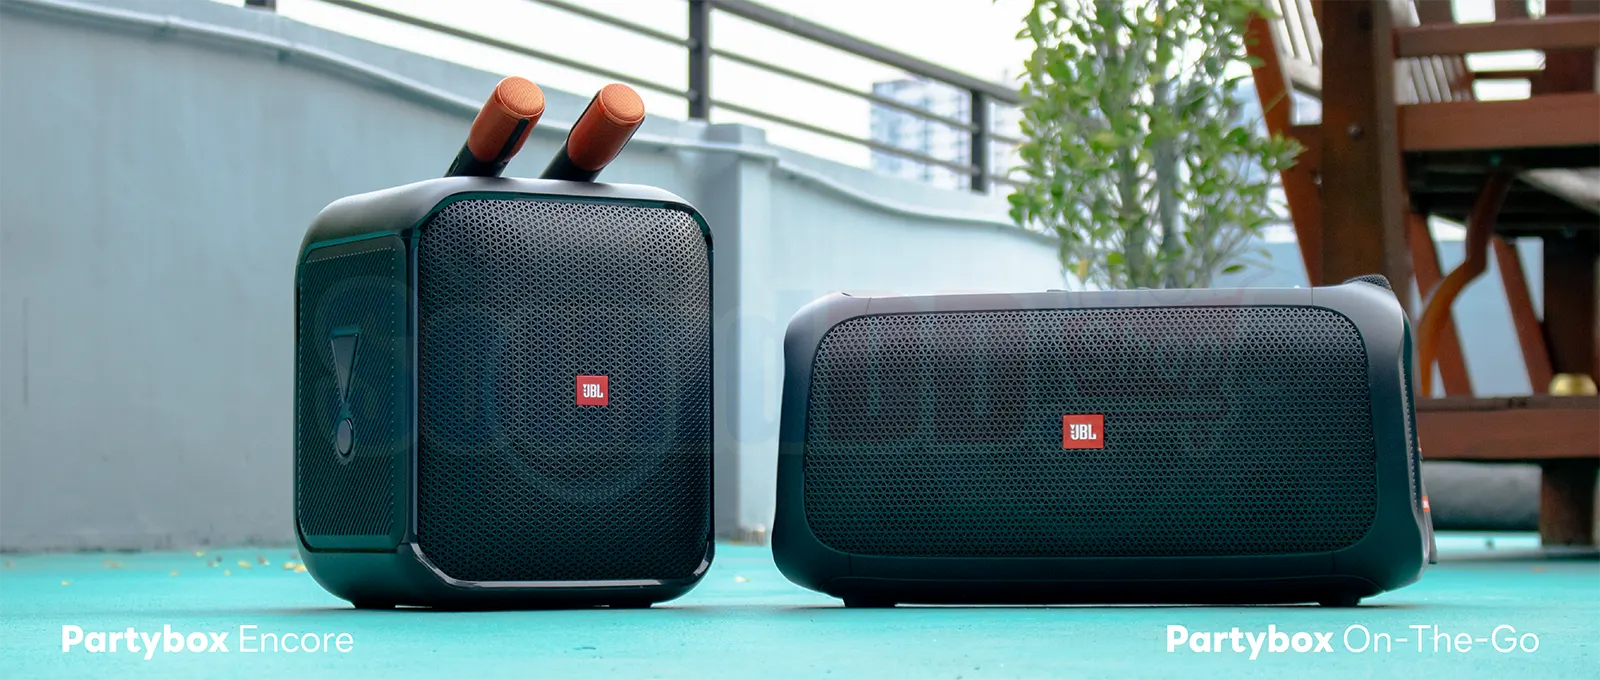 JBL Partybox Encore Vs On The Go